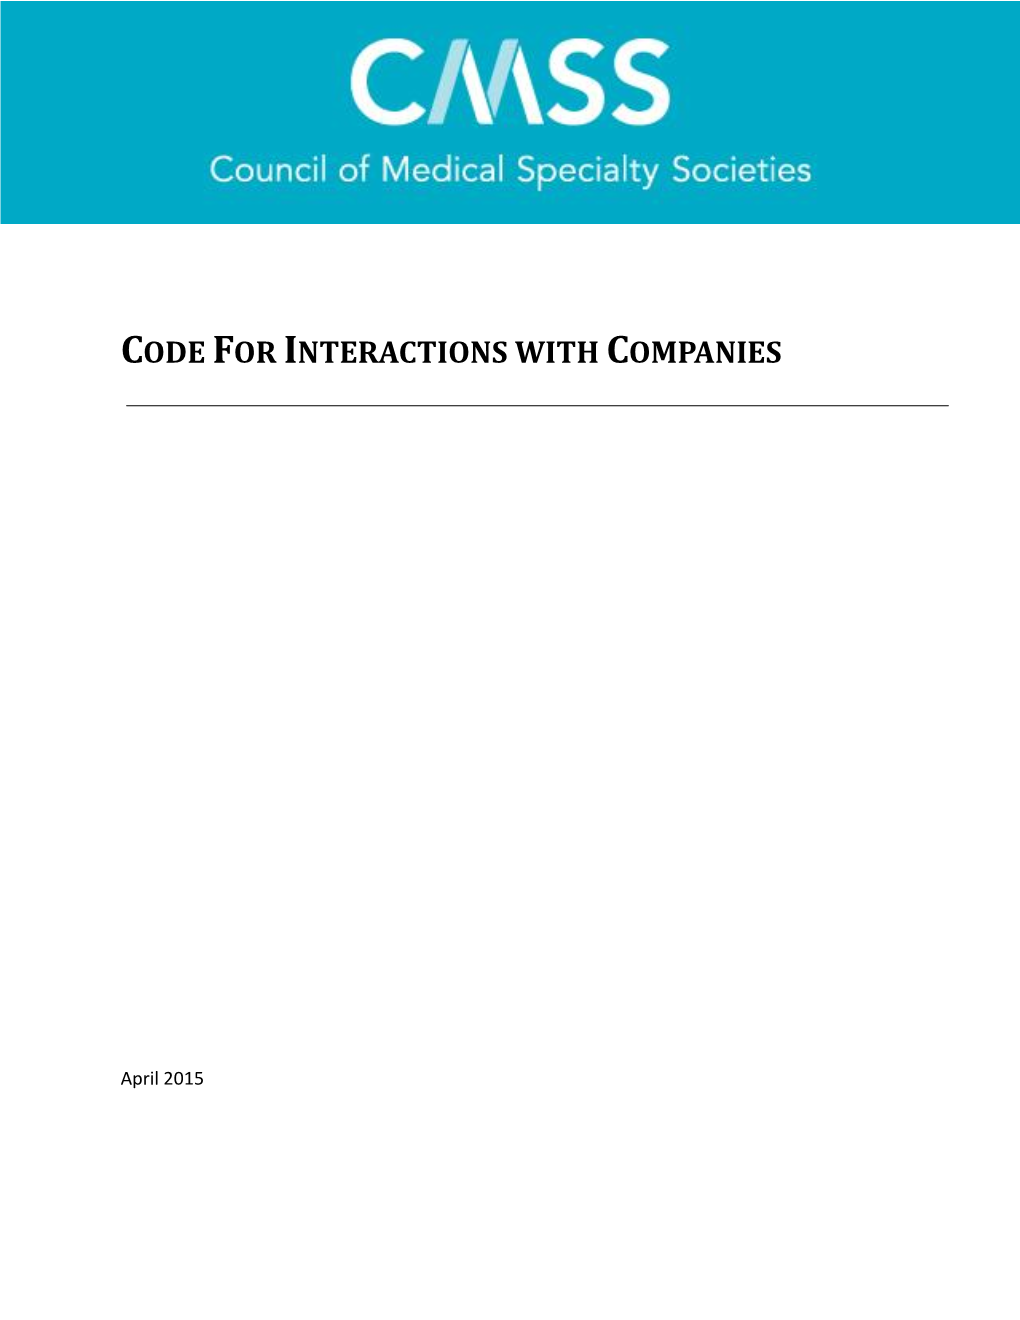 CMSS Code for Interactions with Companies